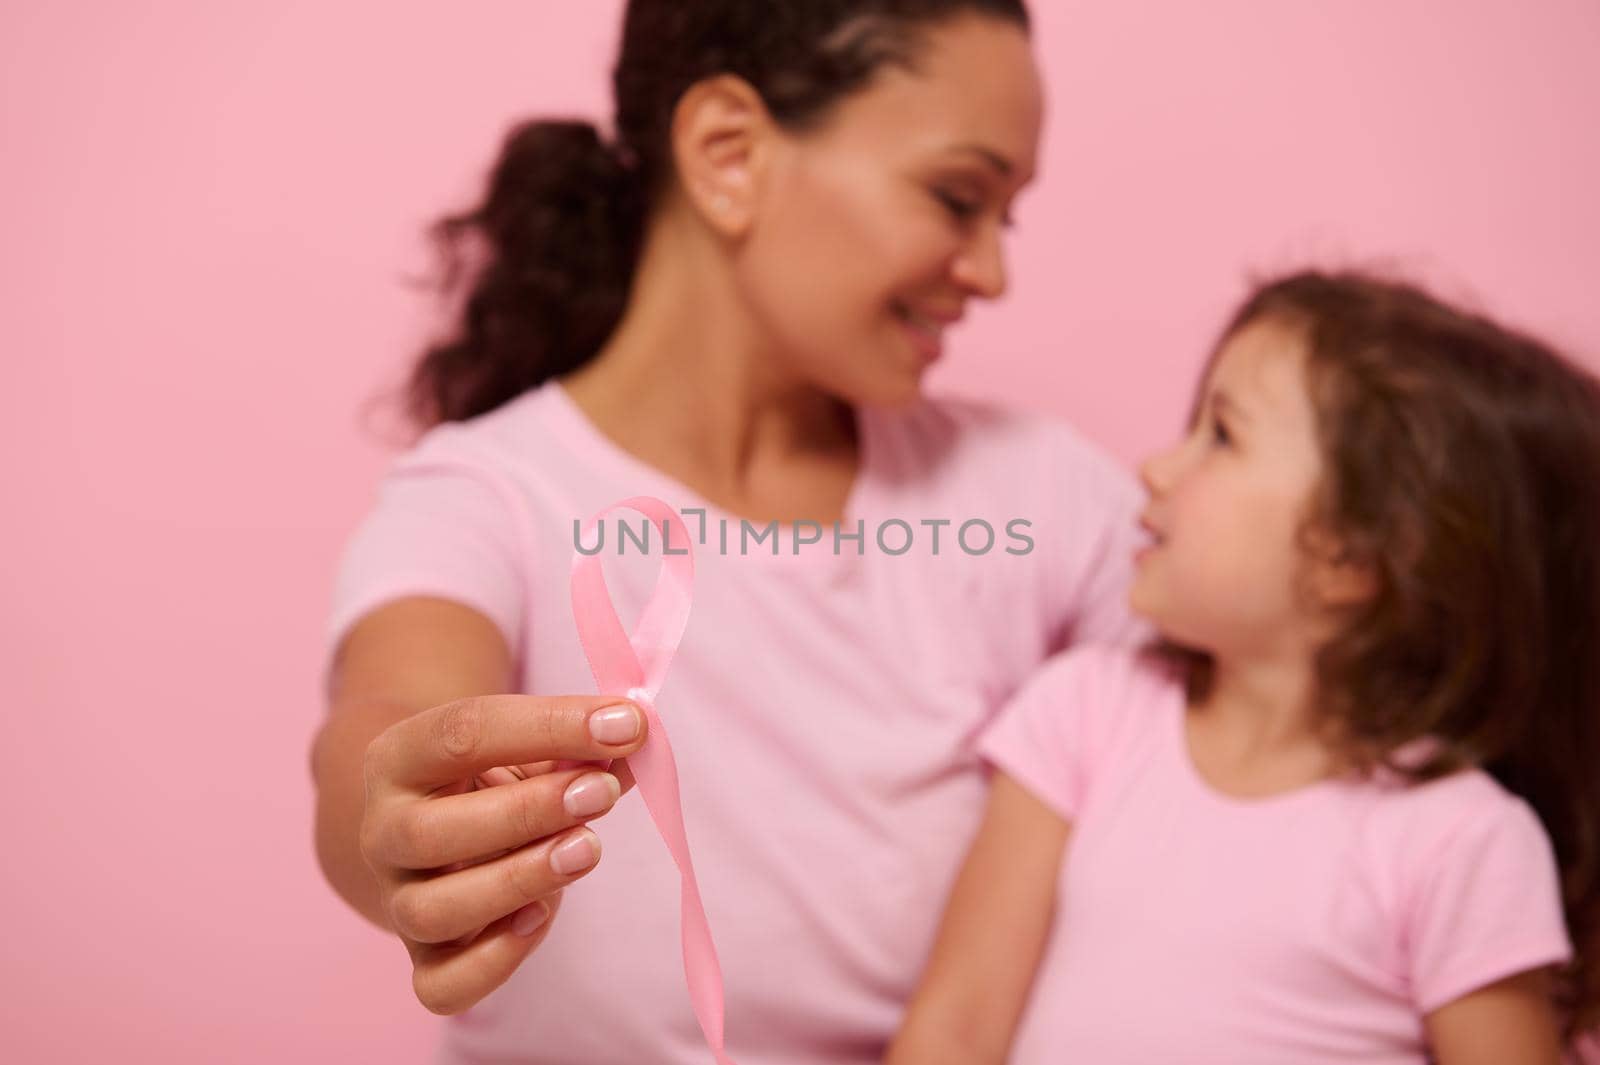 Focus on pink ribbon in the hands of blurred woman and girl wearing pink ribbons and t-shirts - banner for Breast Cancer Awareness Day. Motivational slogan to fight cancer. Copy space